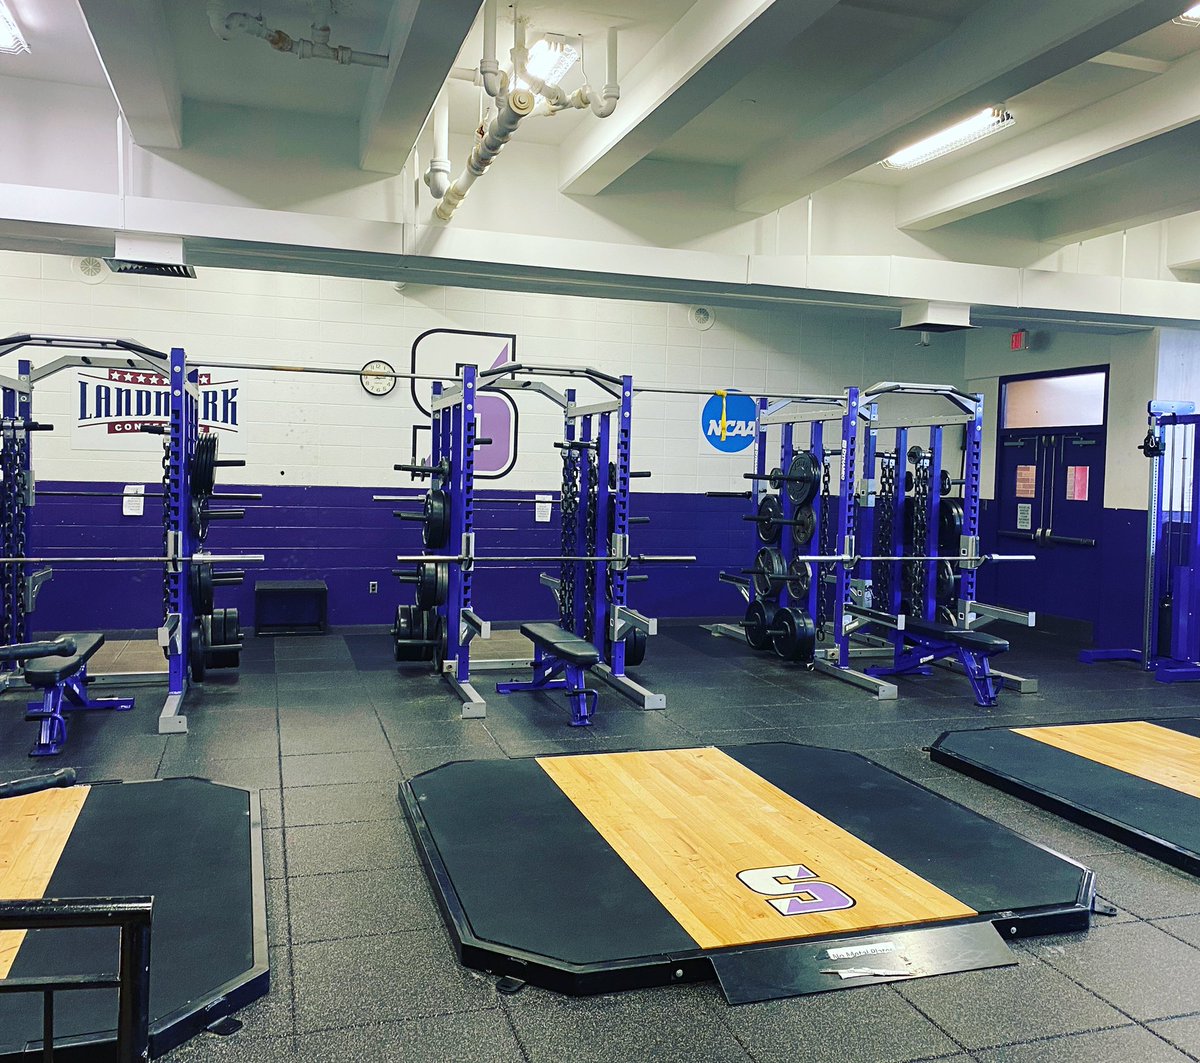 Just finished my workout.can’t wait to be back in here with the team! #liftlikeagirl #royalstrong #scrantonsoftball #whereyouwingames #excitedforseason